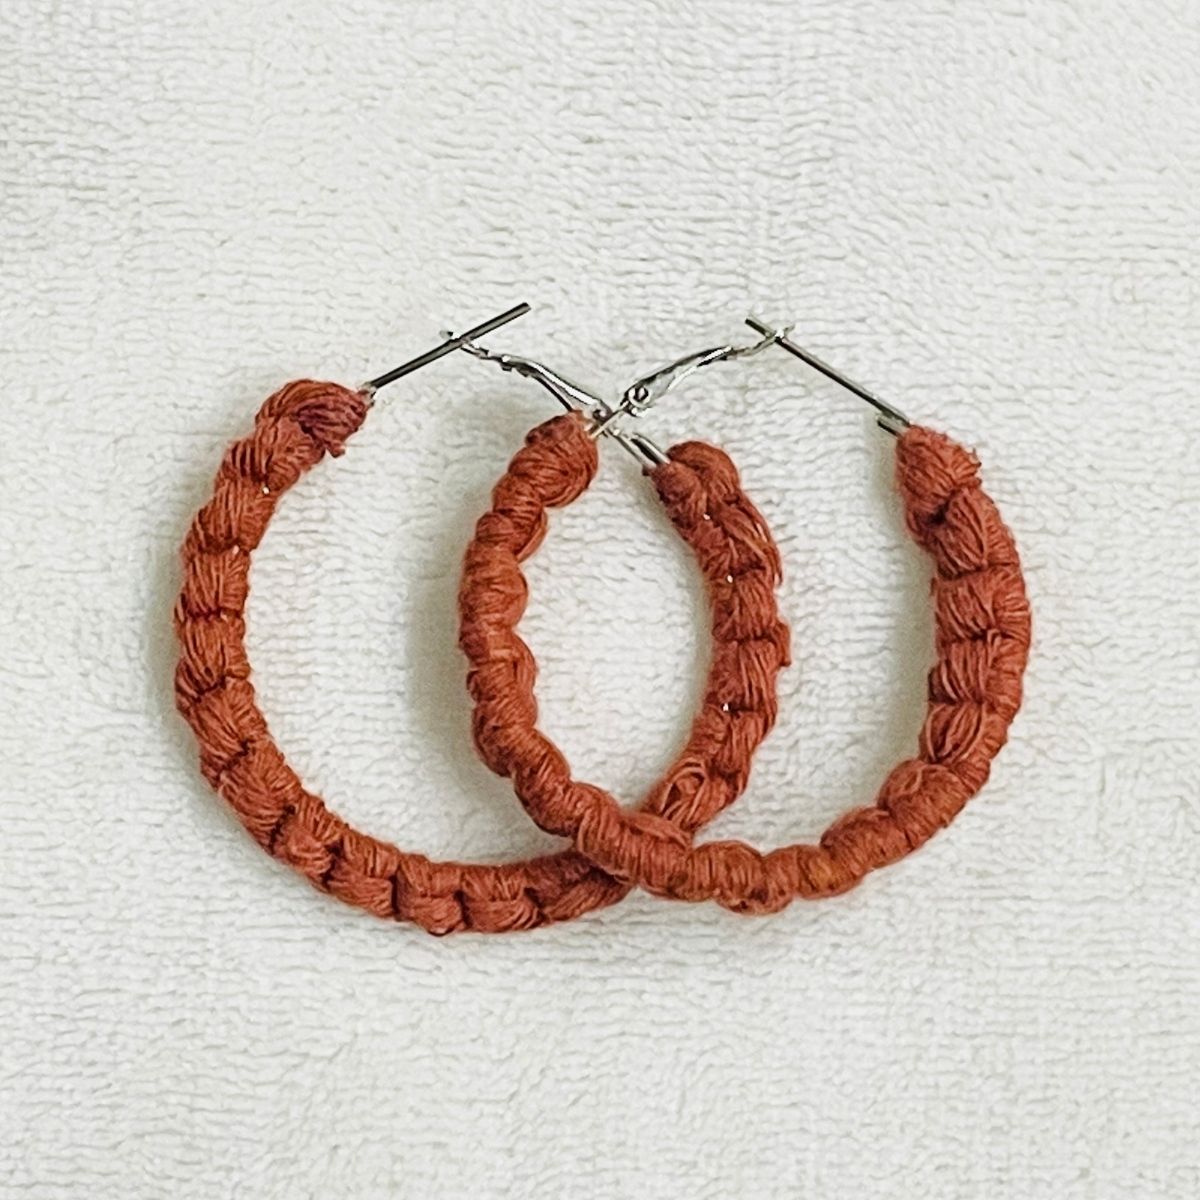 Red Macrame hoop earrings online india wholesale handmade gifts for her valentine's day birthday bridesmaid mothers day gift